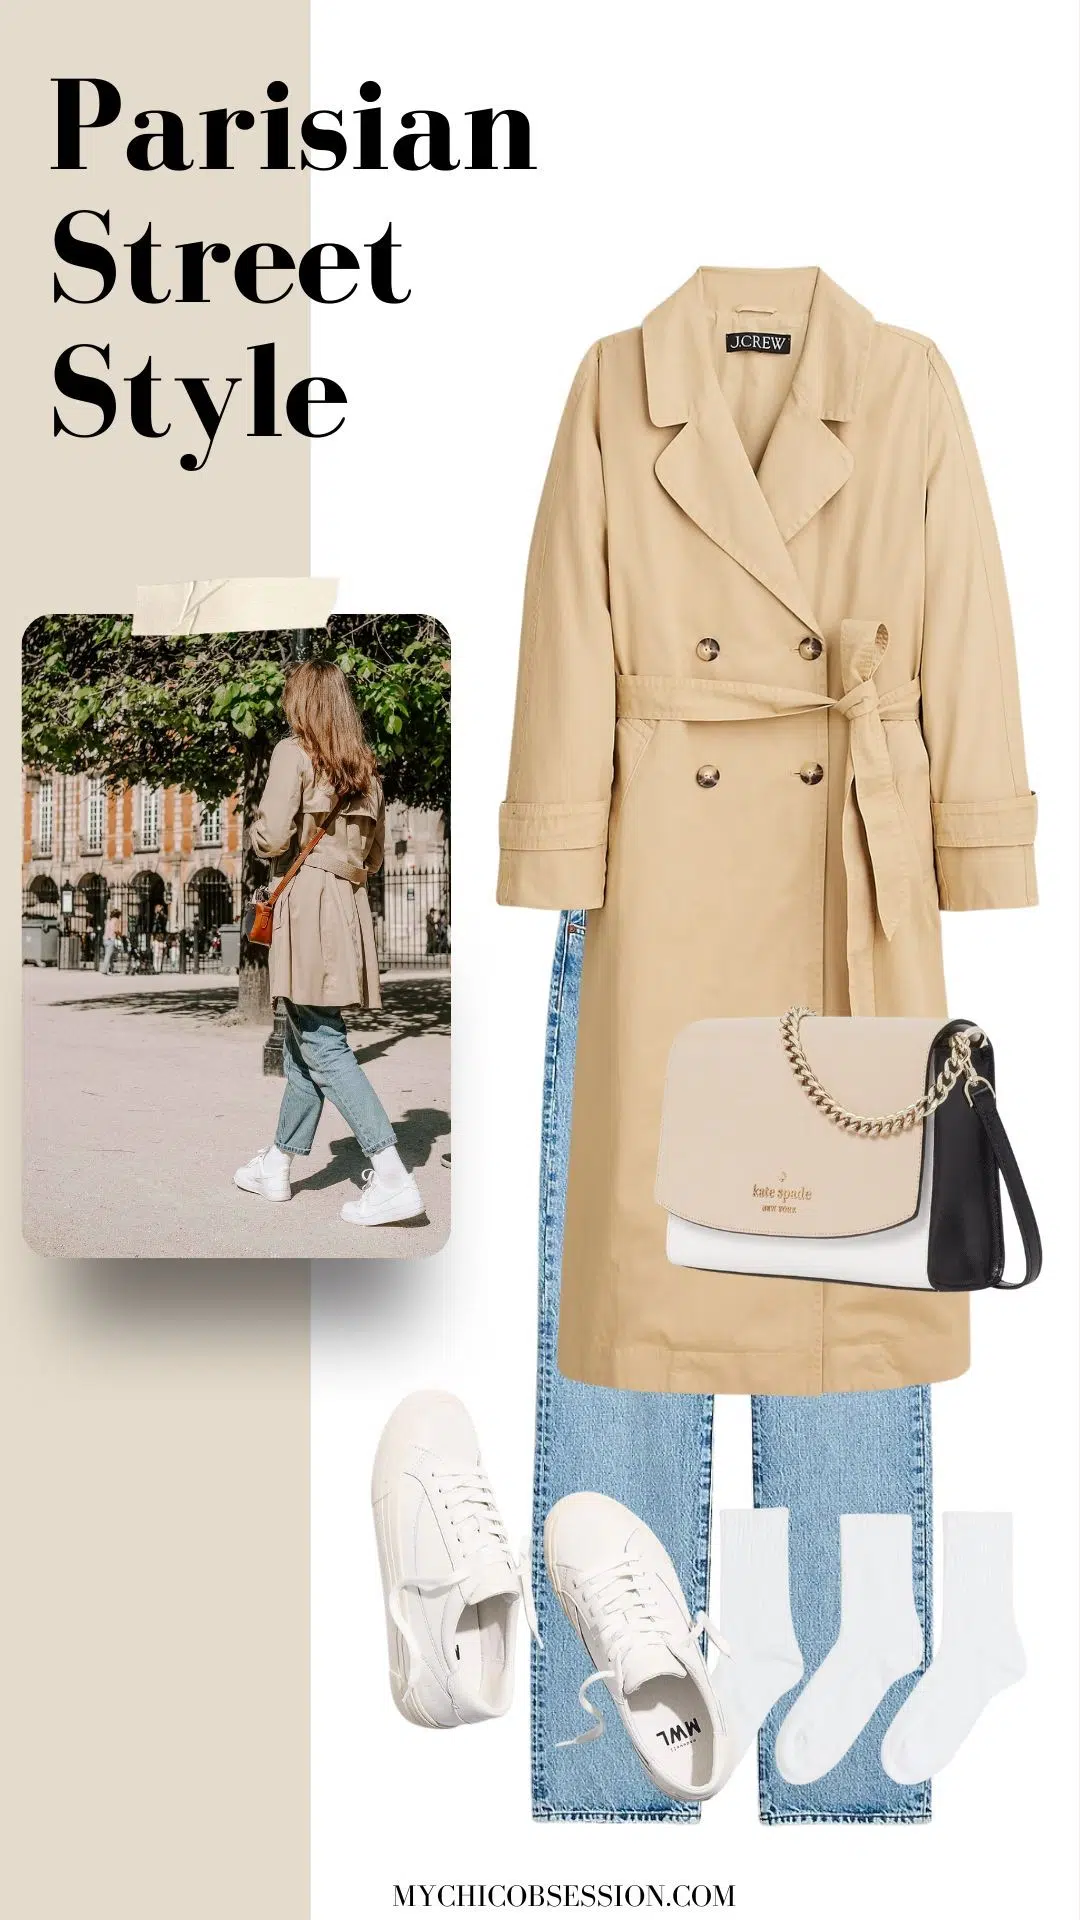 trench coat + sneakers + ankle socks + jeans